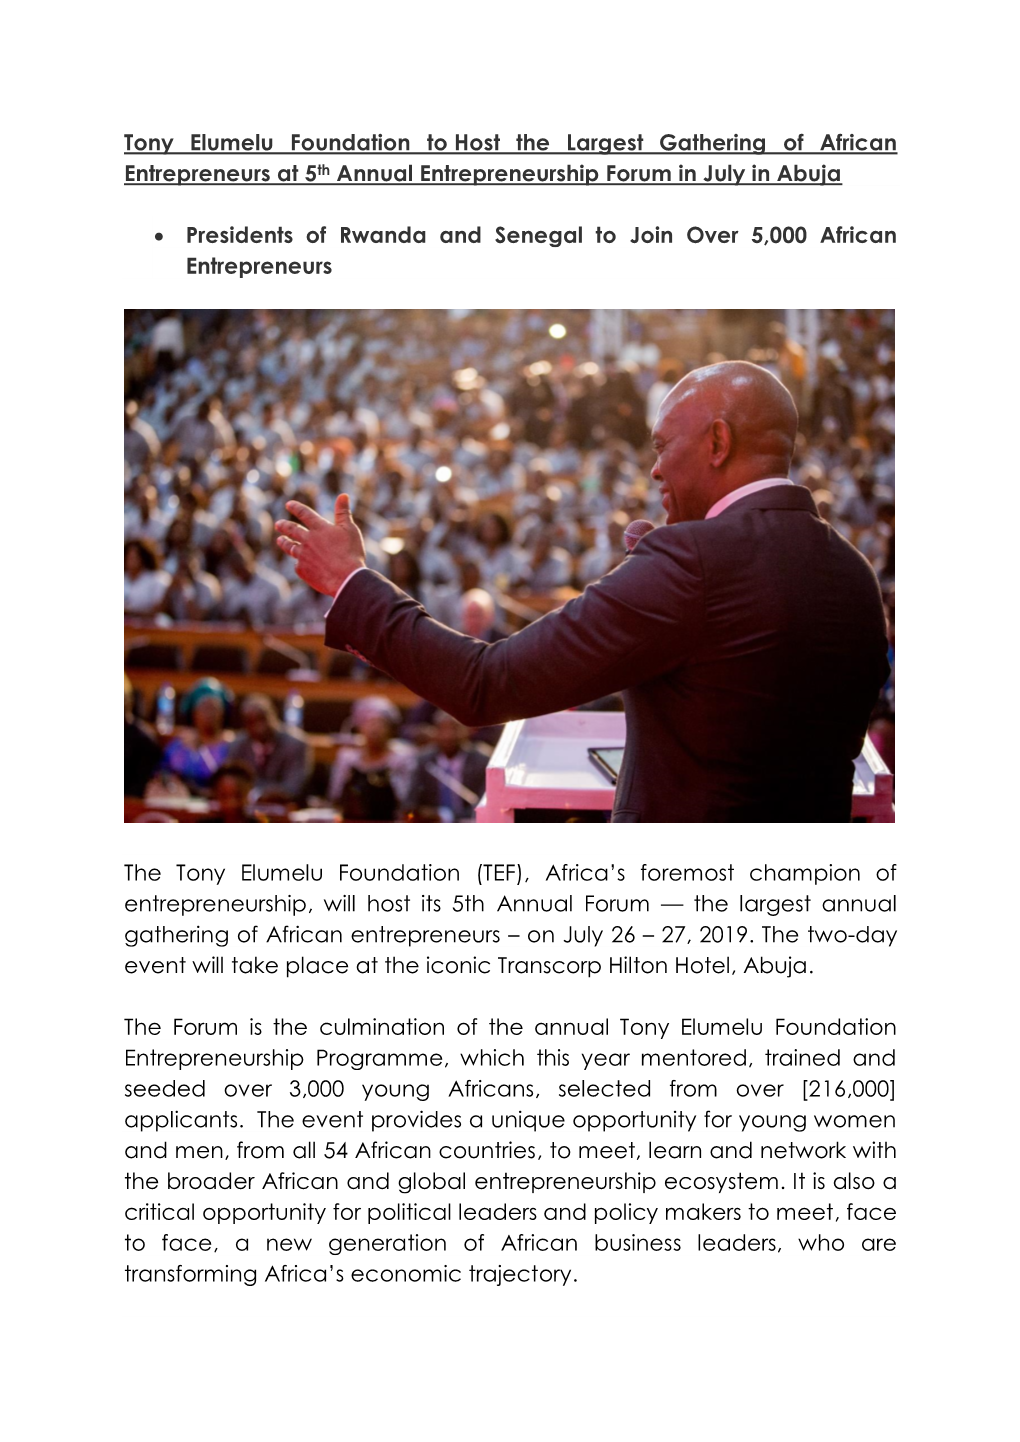 Tony Elumelu Foundation to Host the Largest Gathering of African Entrepreneurs at 5Th Annual Entrepreneurship Forum in July in Abuja